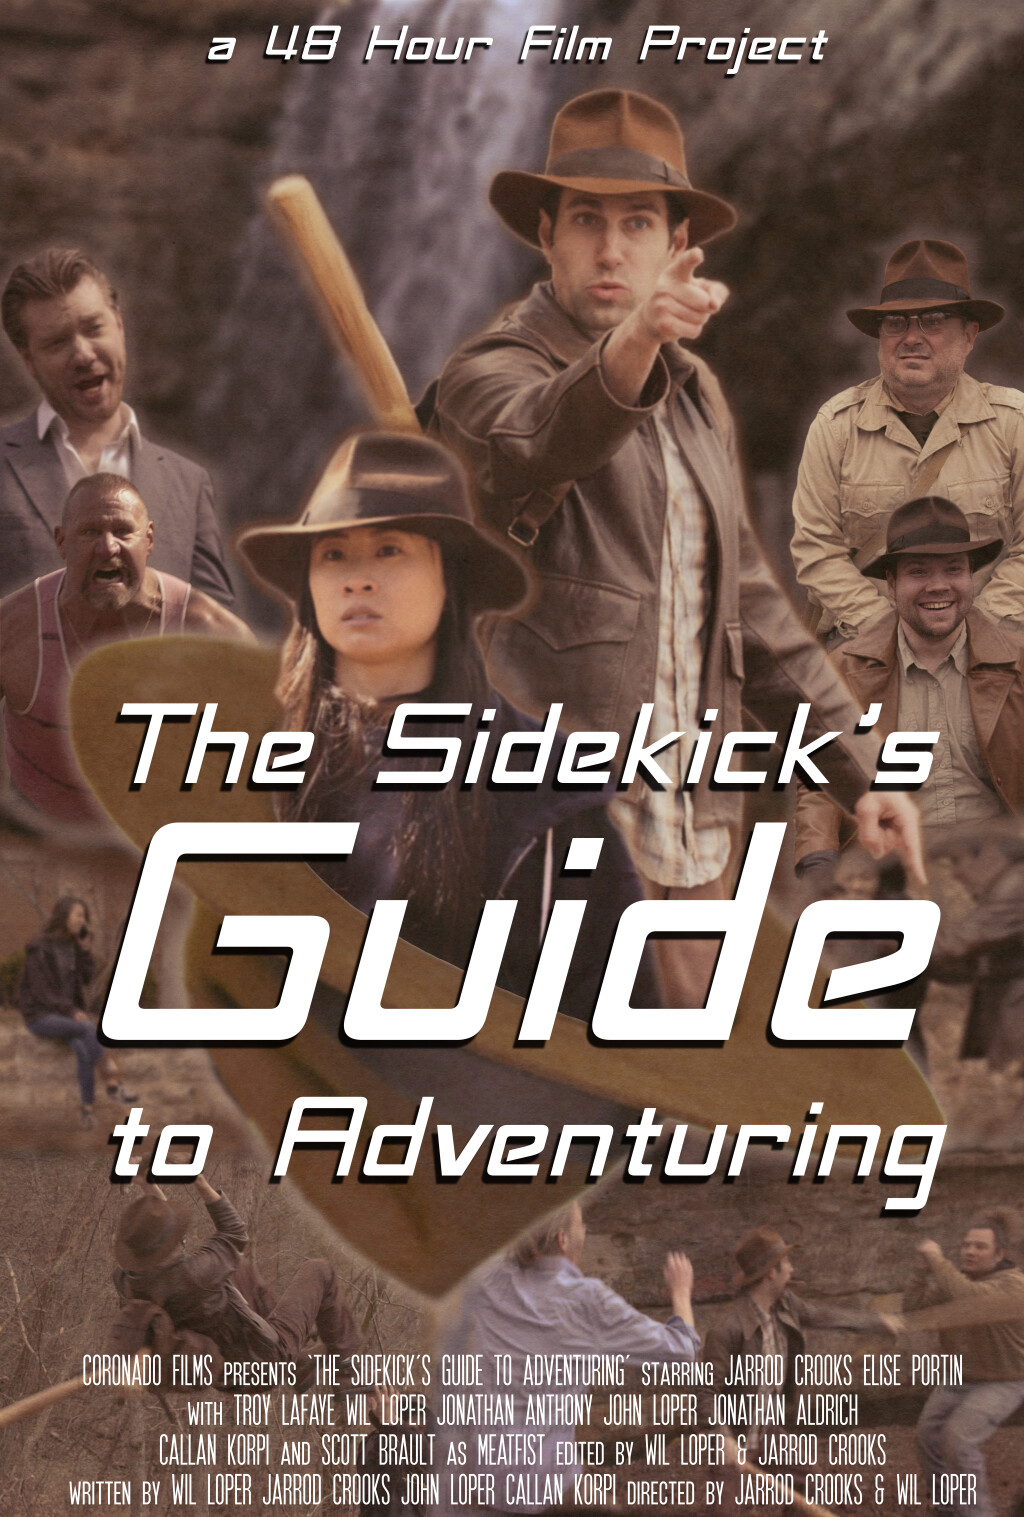 Filmposter for The Sidekick's Guide to Adventuring